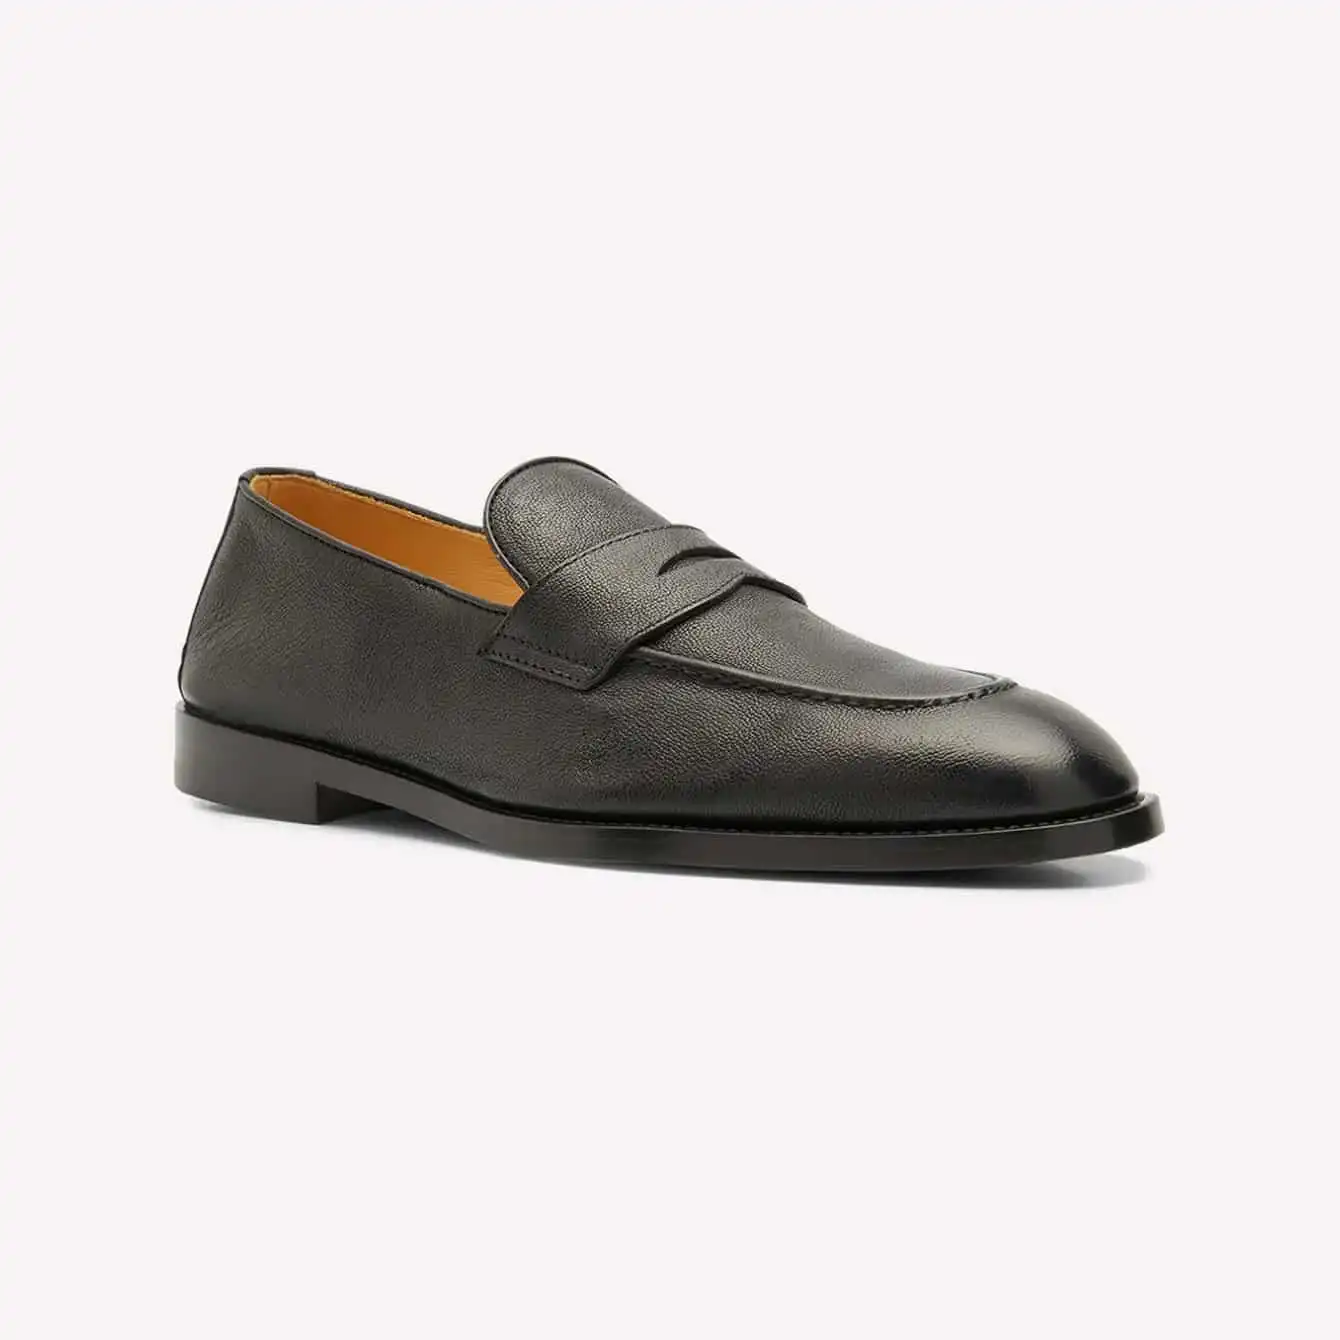 Brunello Cucinelli - Mens Leather Penny Loafers